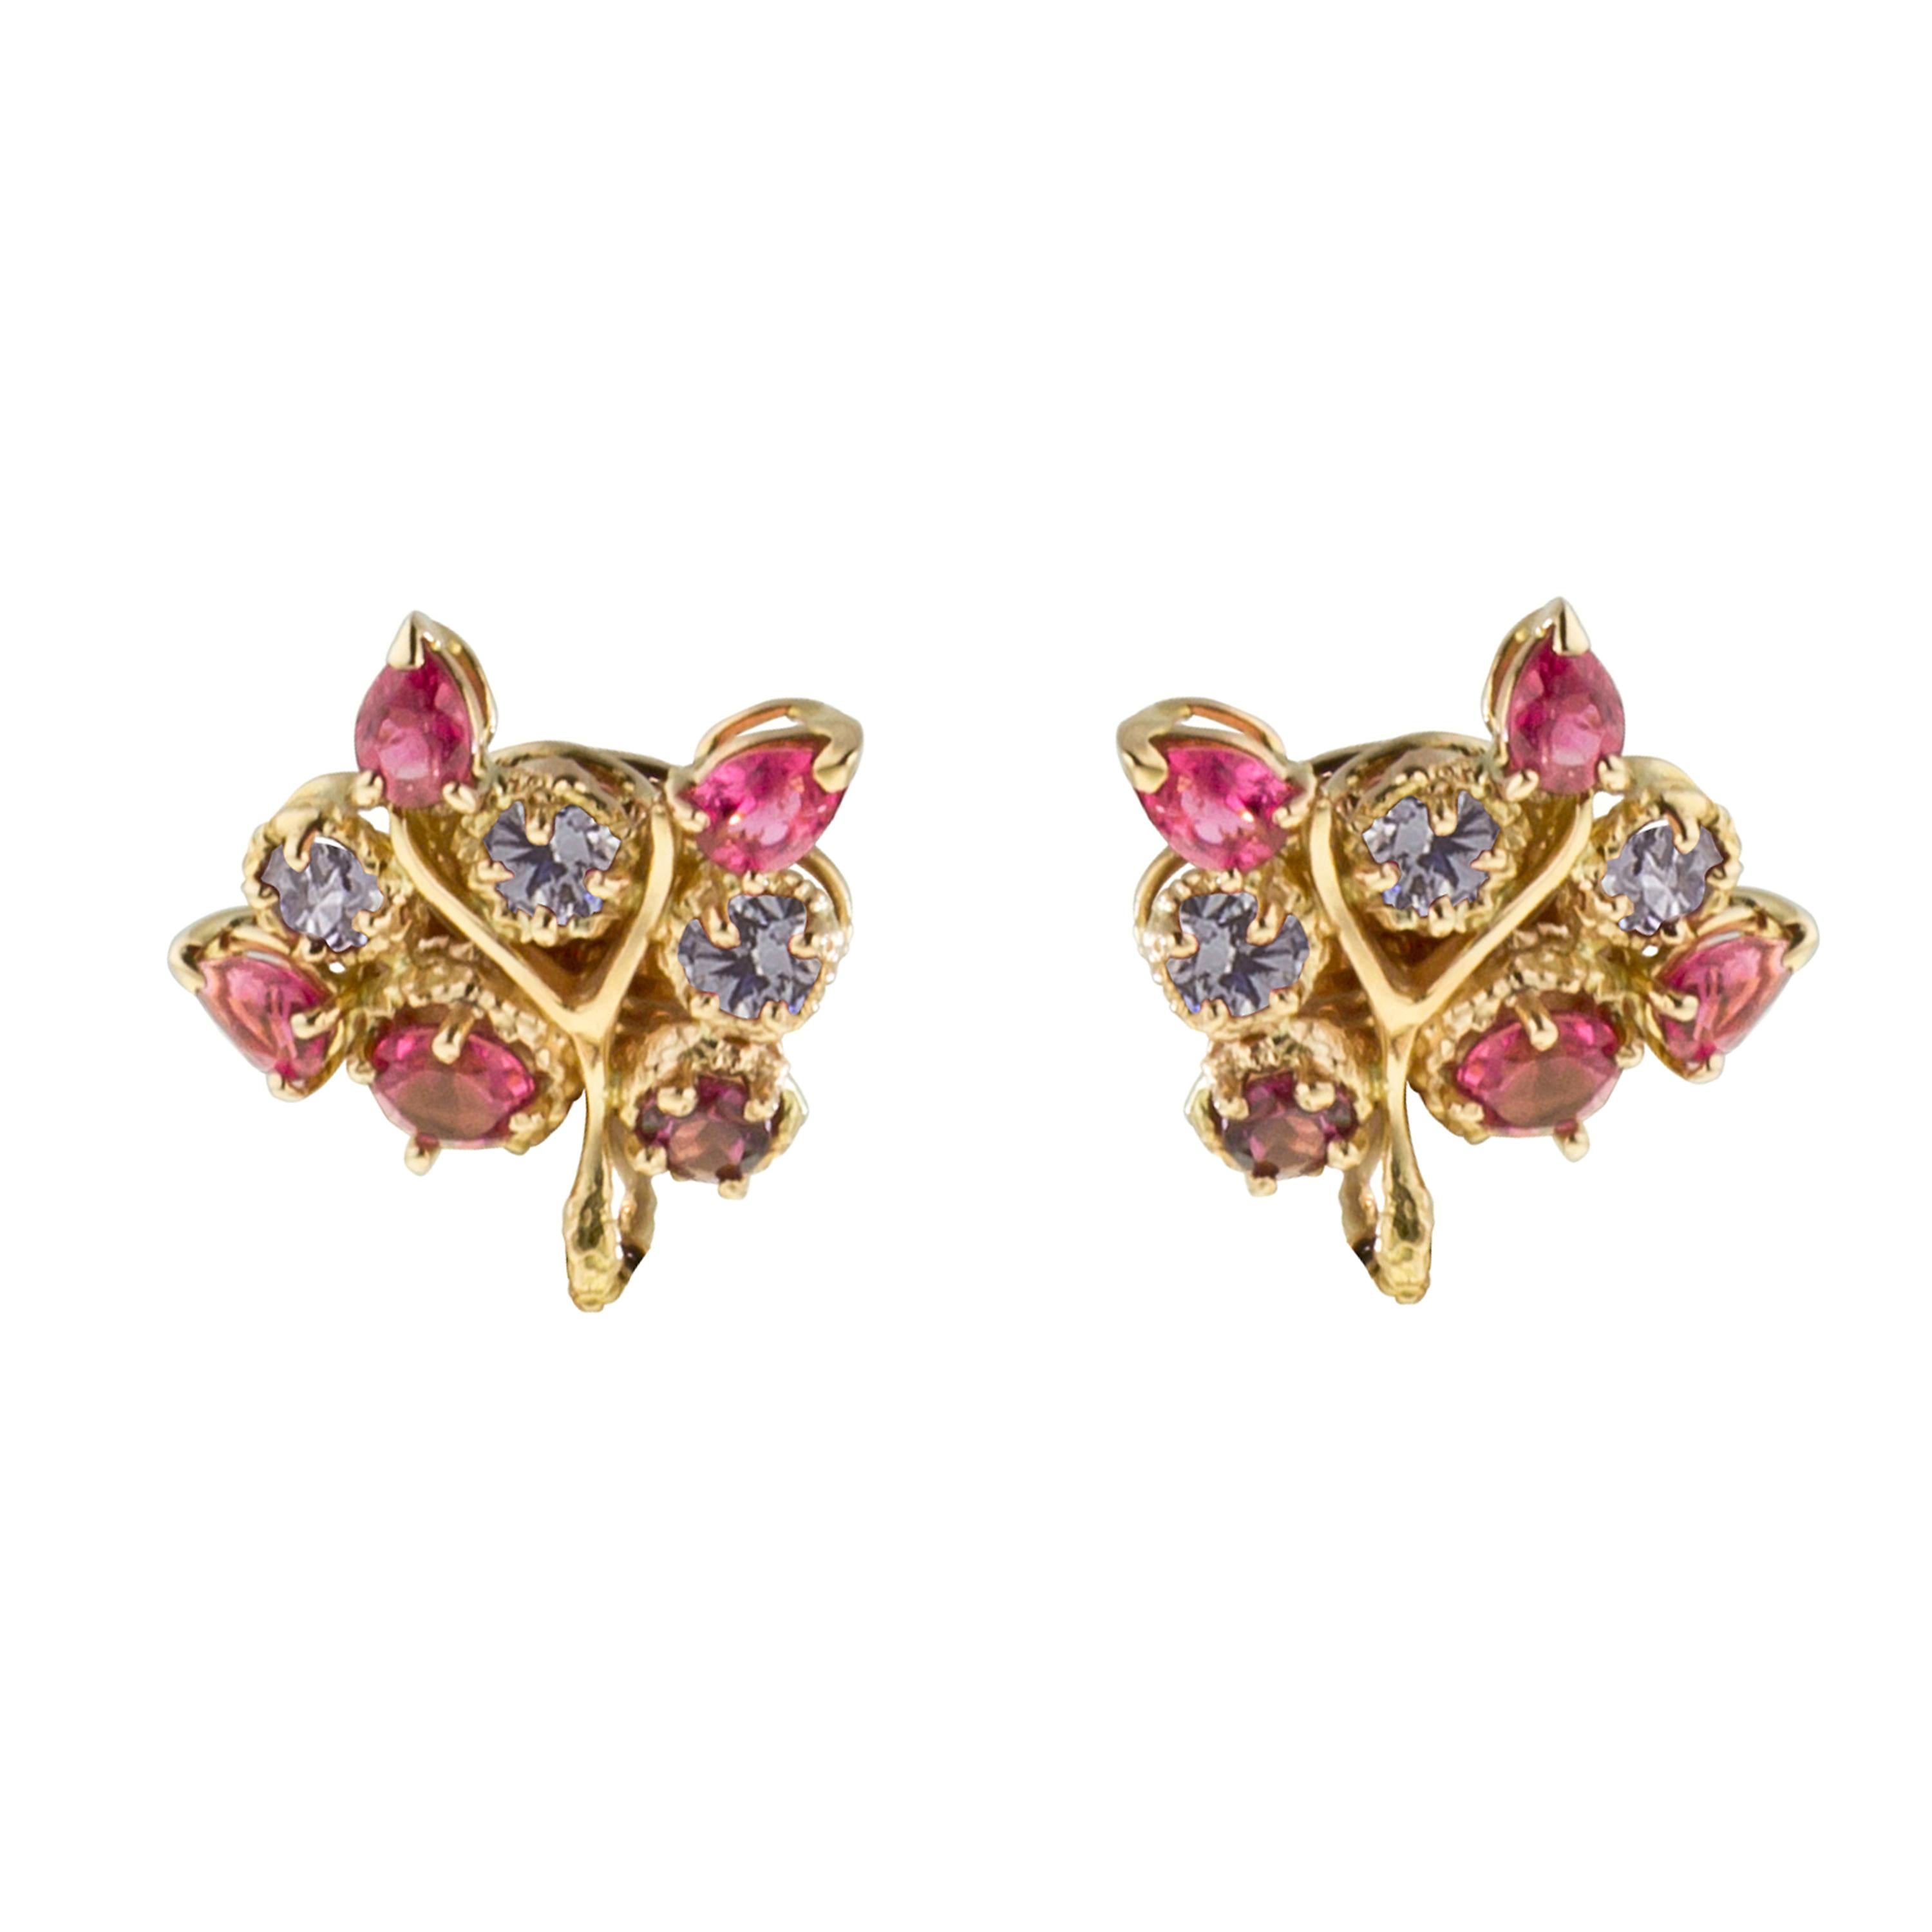 One of a Kind Statement Earrings. The inspiration of the earrings comes from the beauty of the Brazilian Watermelon Tourmaline carat 40,61, the cut of the Tourmaline is Portrait cut, this particular cut exhalts the transperancy and natural beauty of